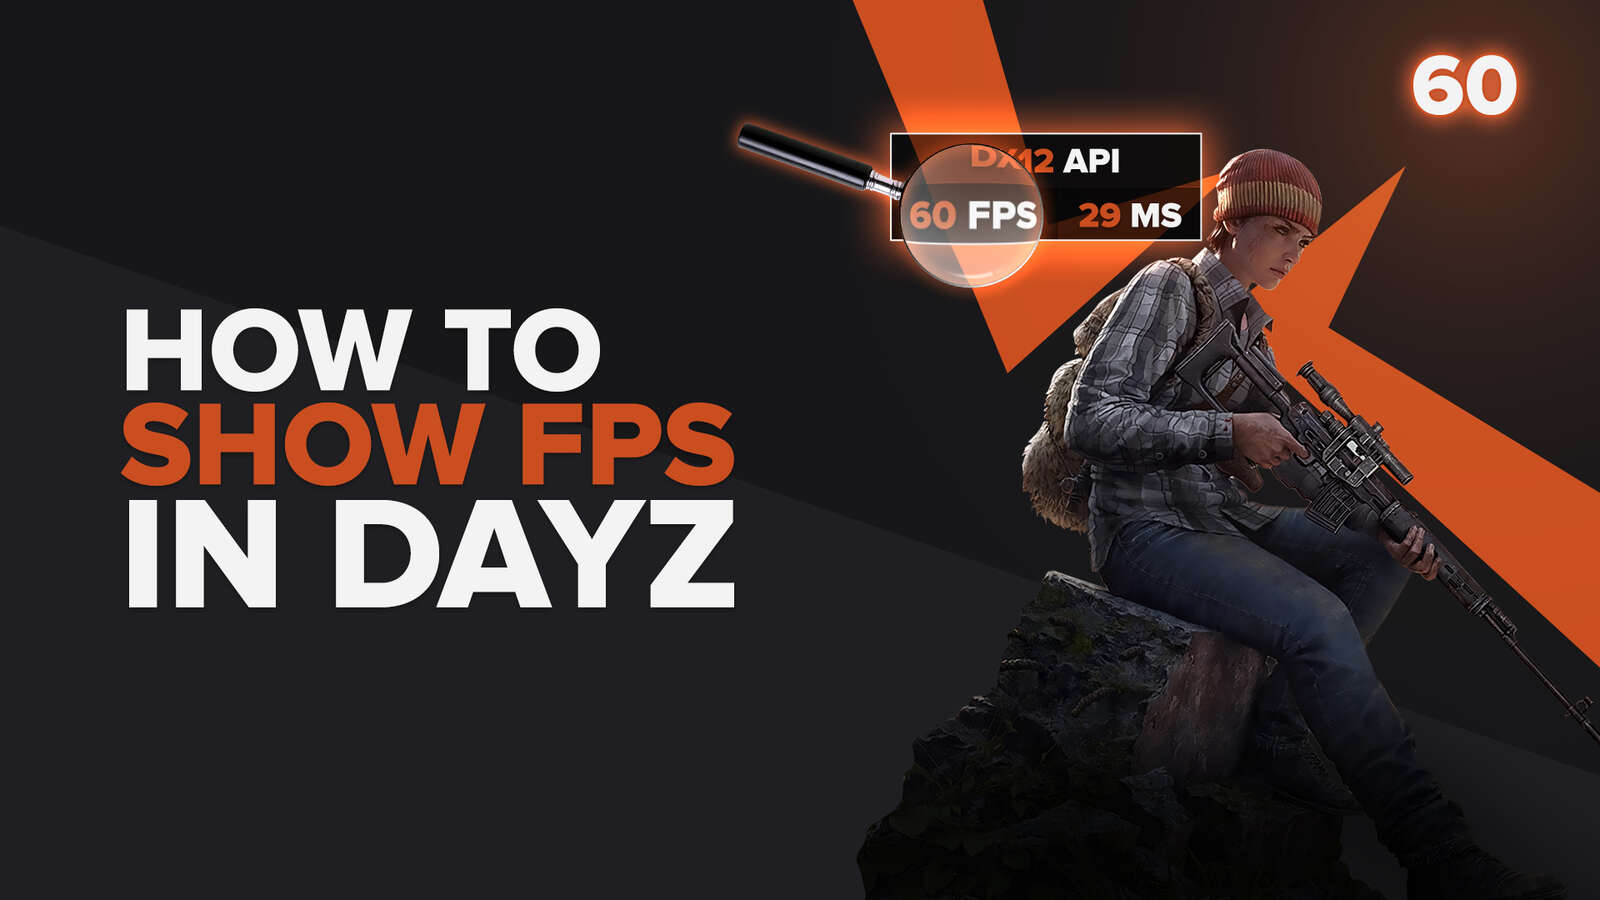 How to show your FPS in DayZ in a few clicks